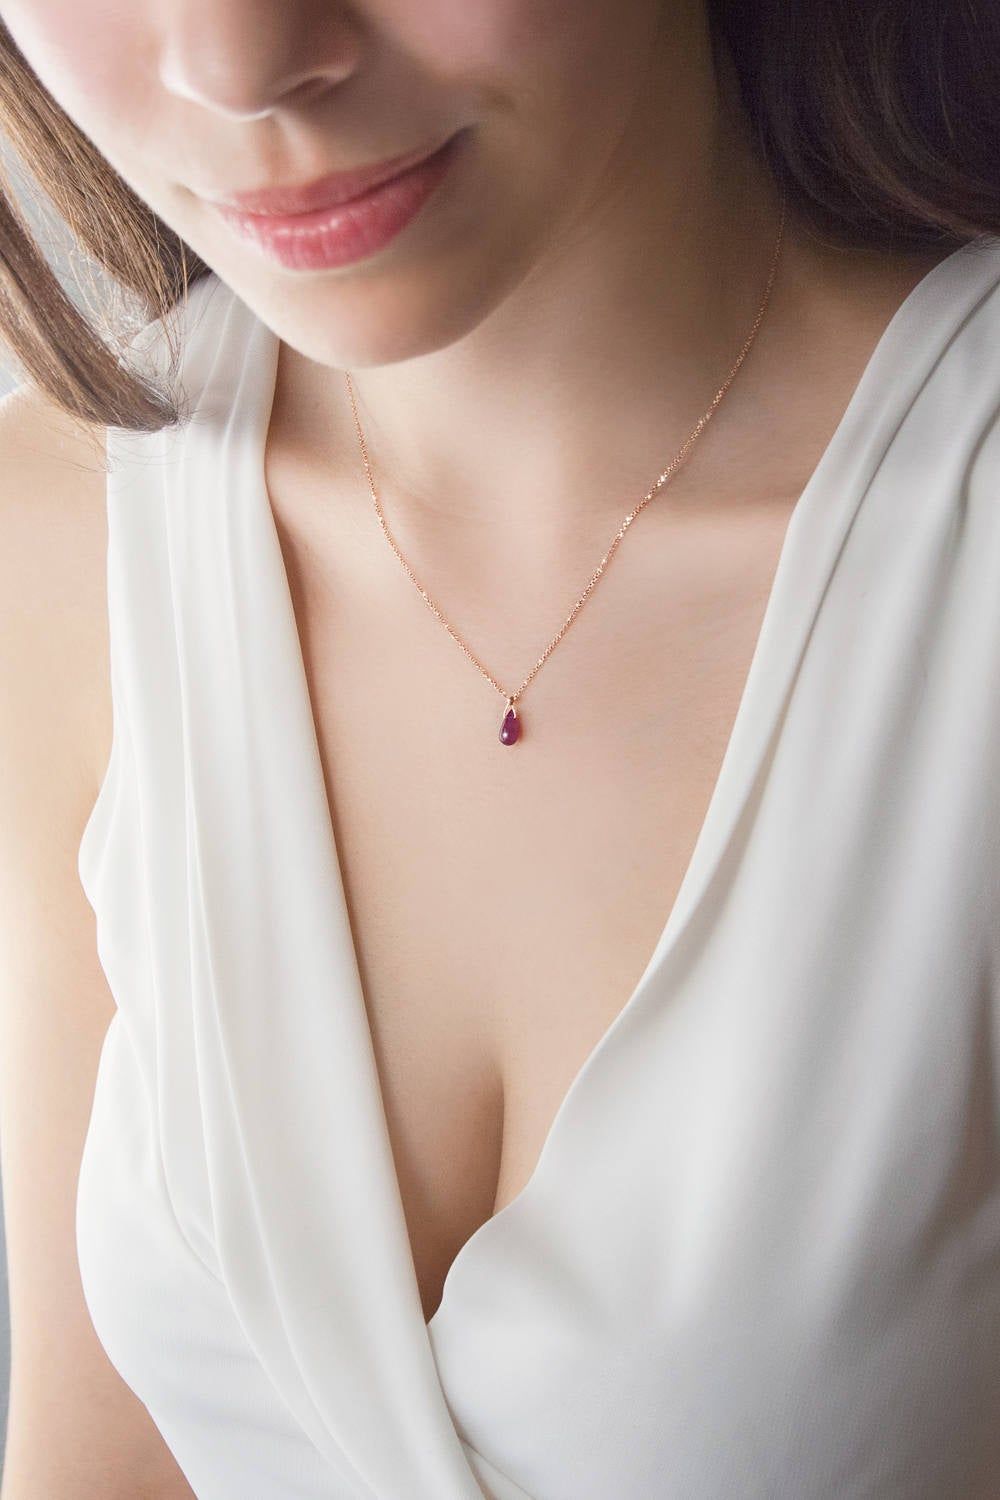 Add amazing ruby pendant in your jewelry